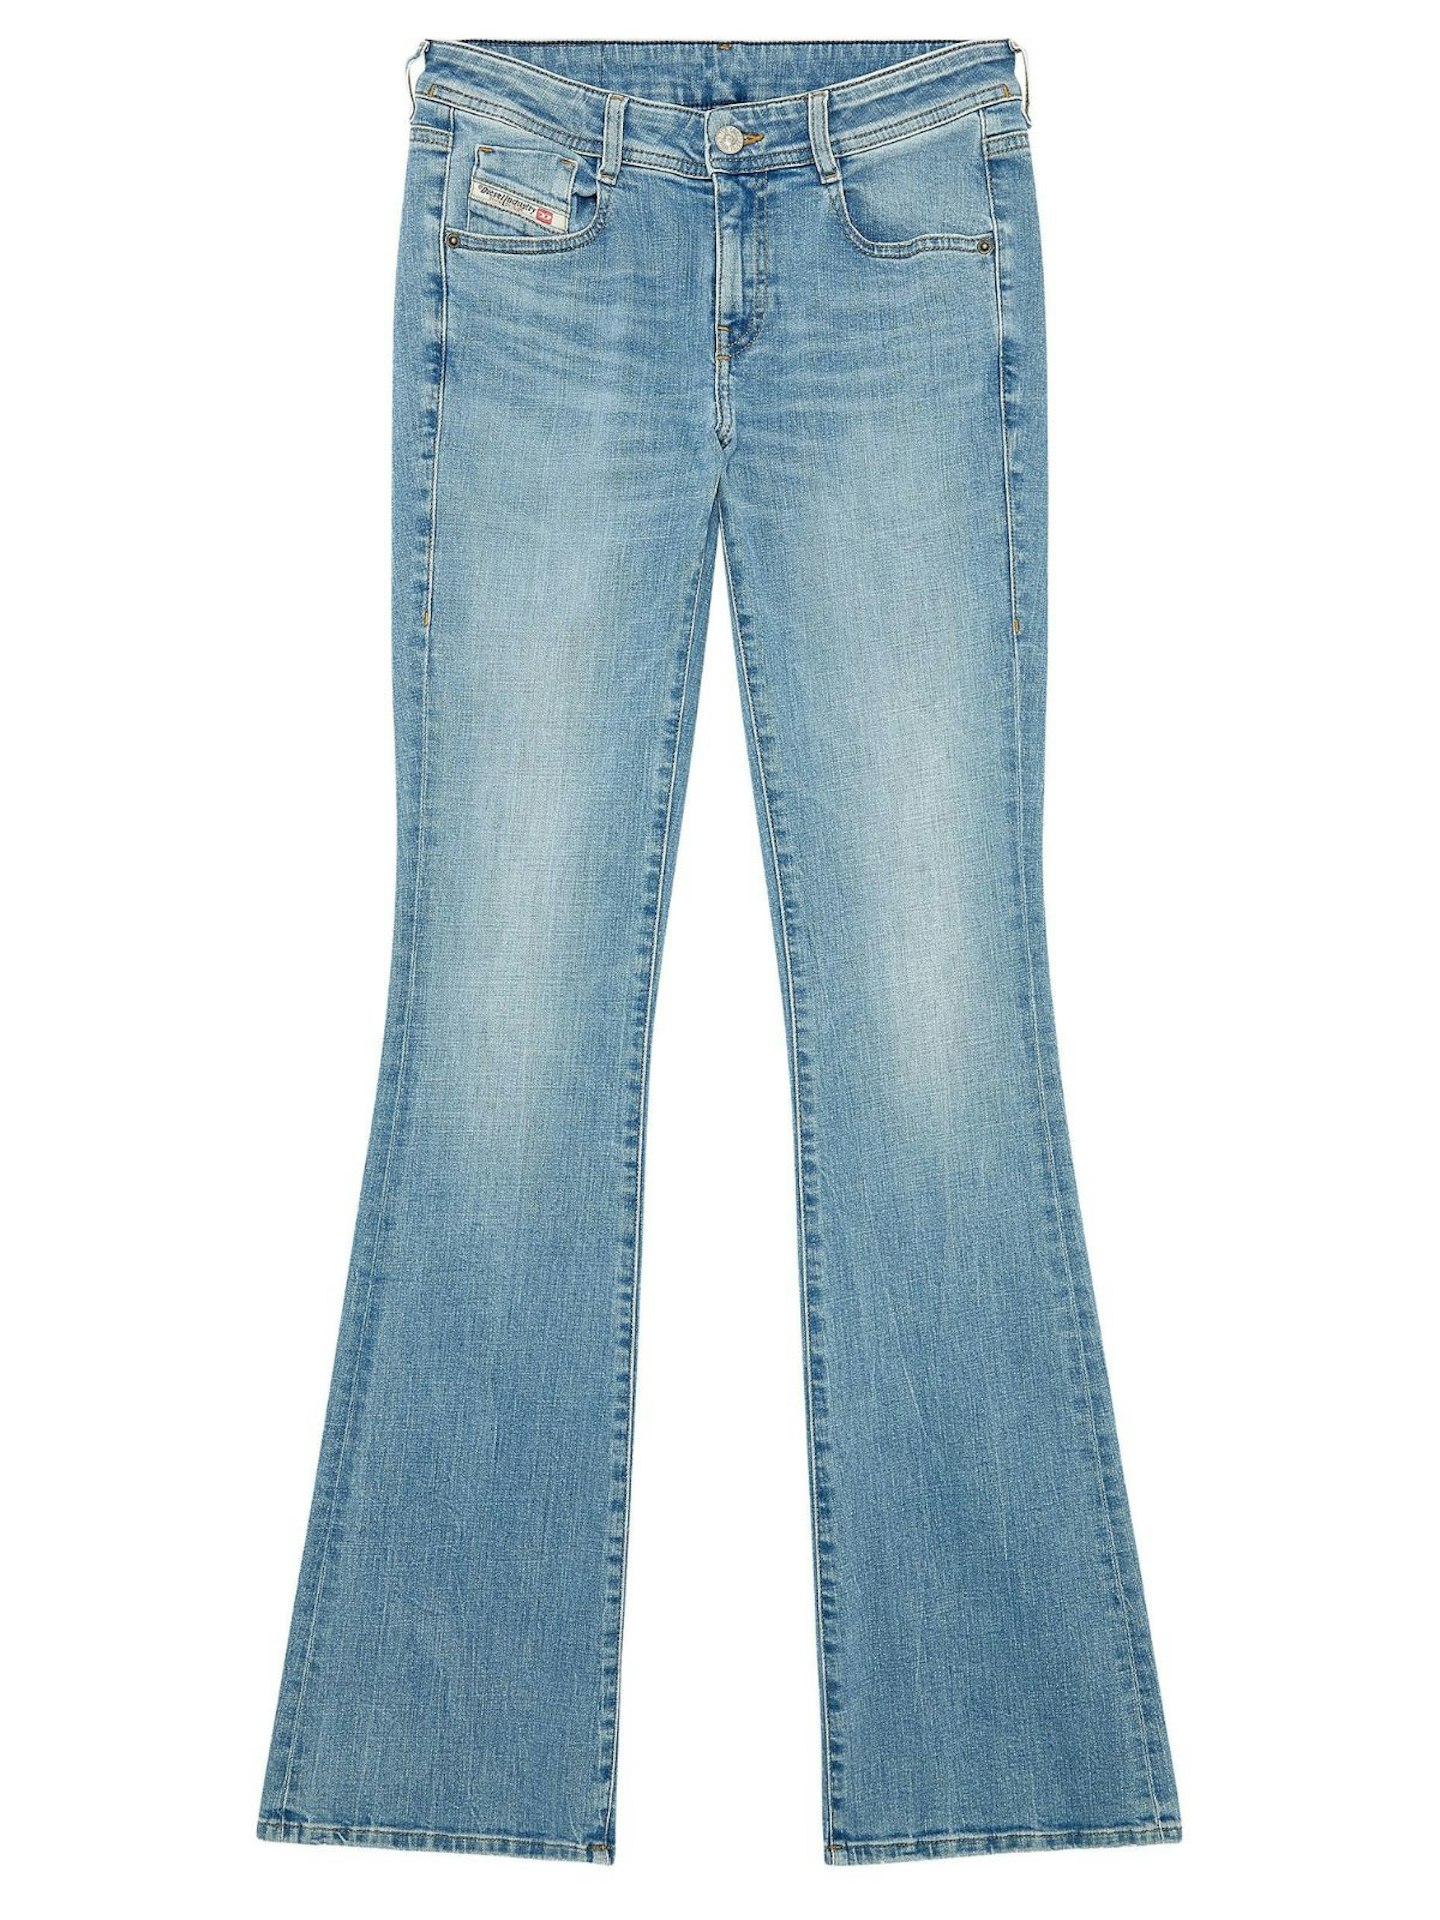 Diesel Bootcut And Flare Jeans 1969 D-Ebbey 09h61